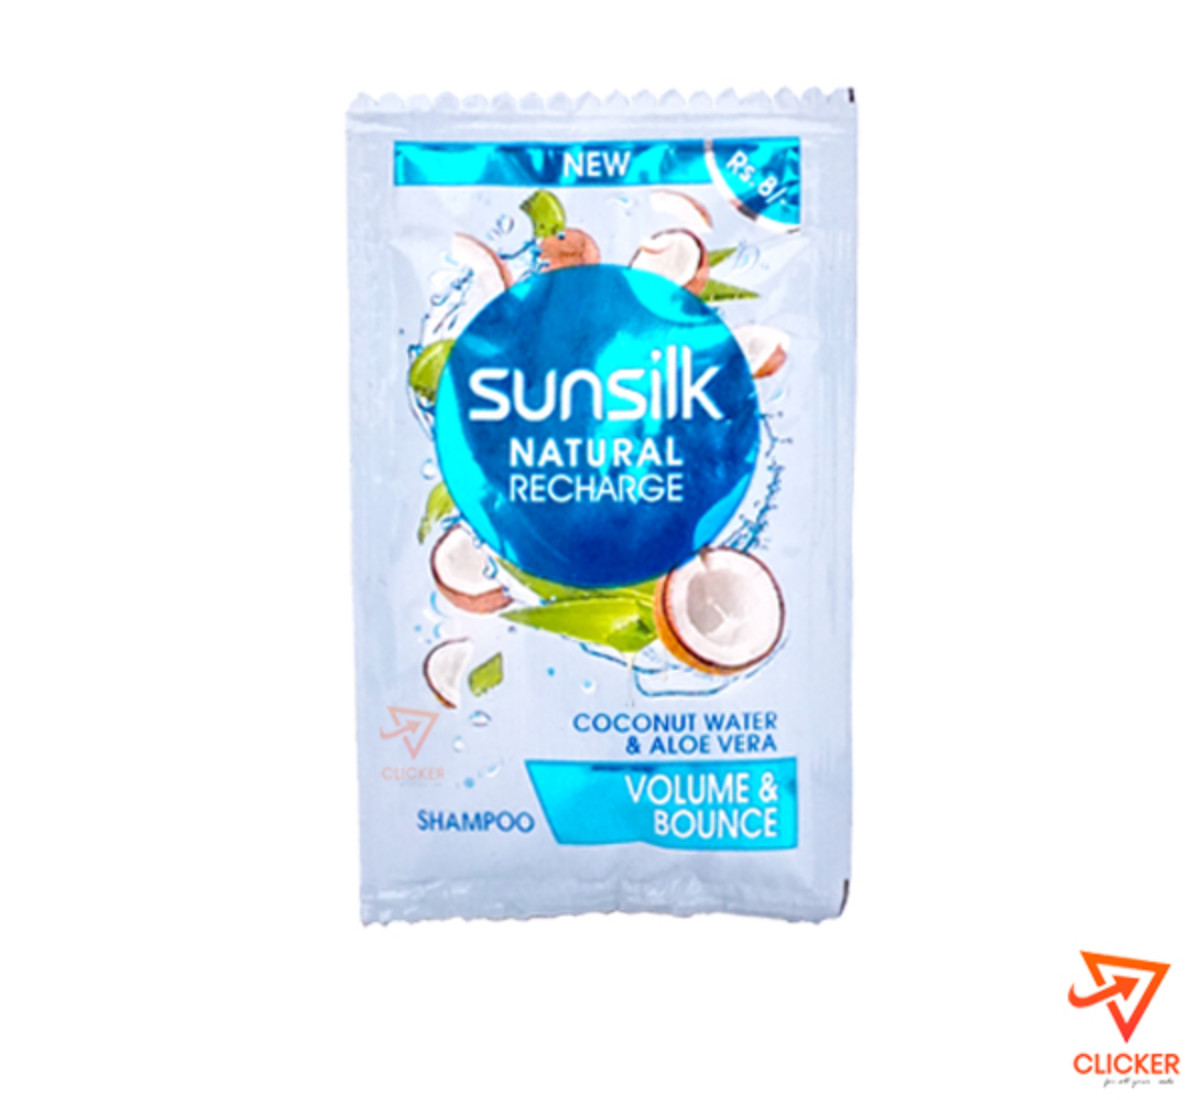 Clicker product 6ml Sunsilk natural Recharge coconut water and aloe vera volume and bounce shampoo 818